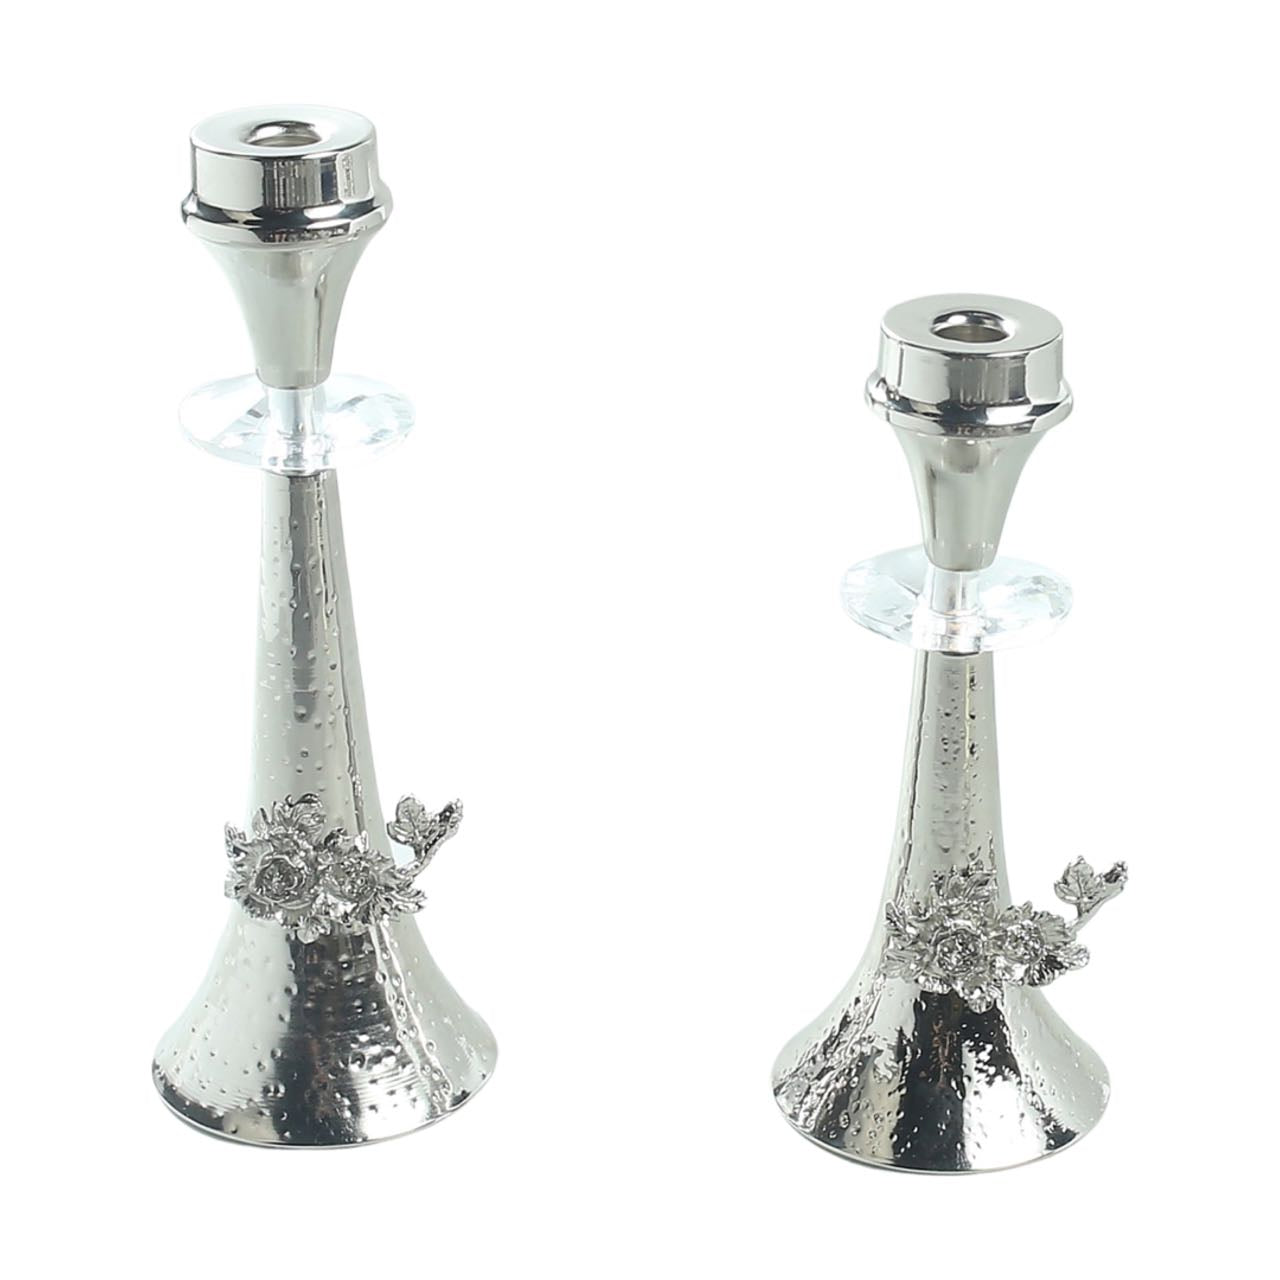 Jolie Candle Holder- Silver (SML)